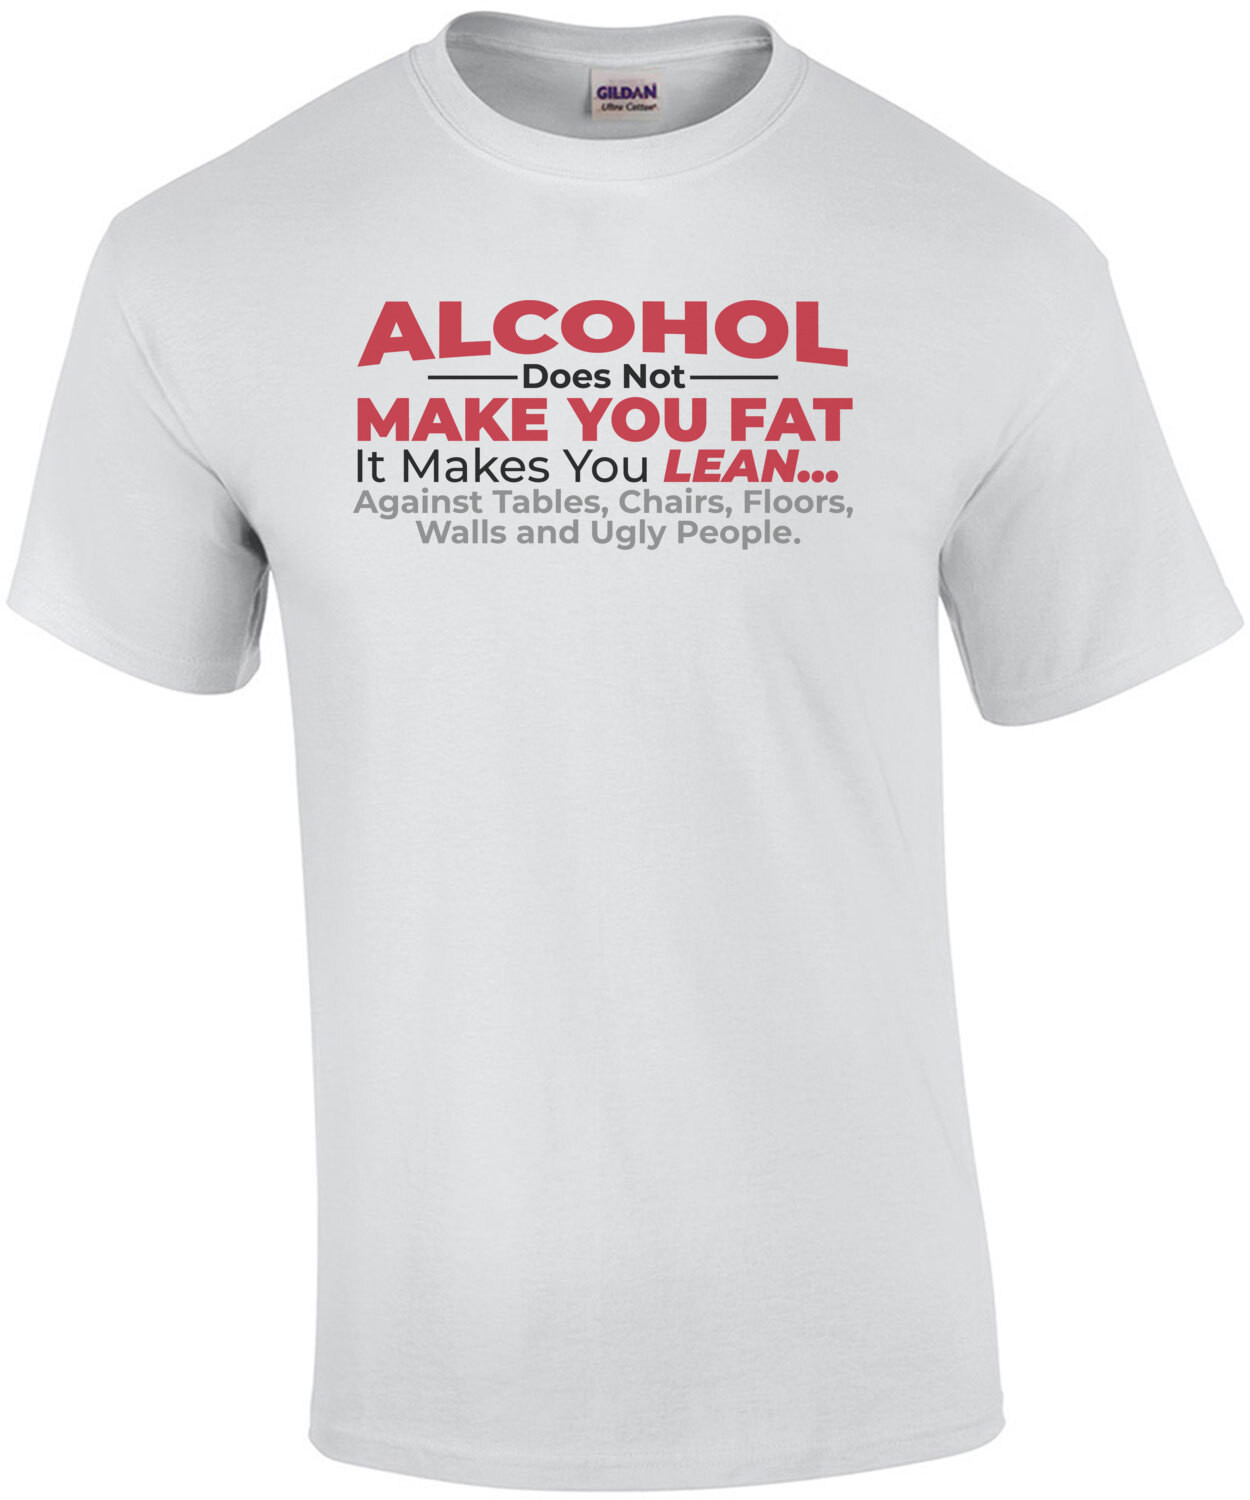 Alcohol does not make you fat - it makes you lean against tables, chairs, floors, walls, and ugly people - funny drinking t-shirt